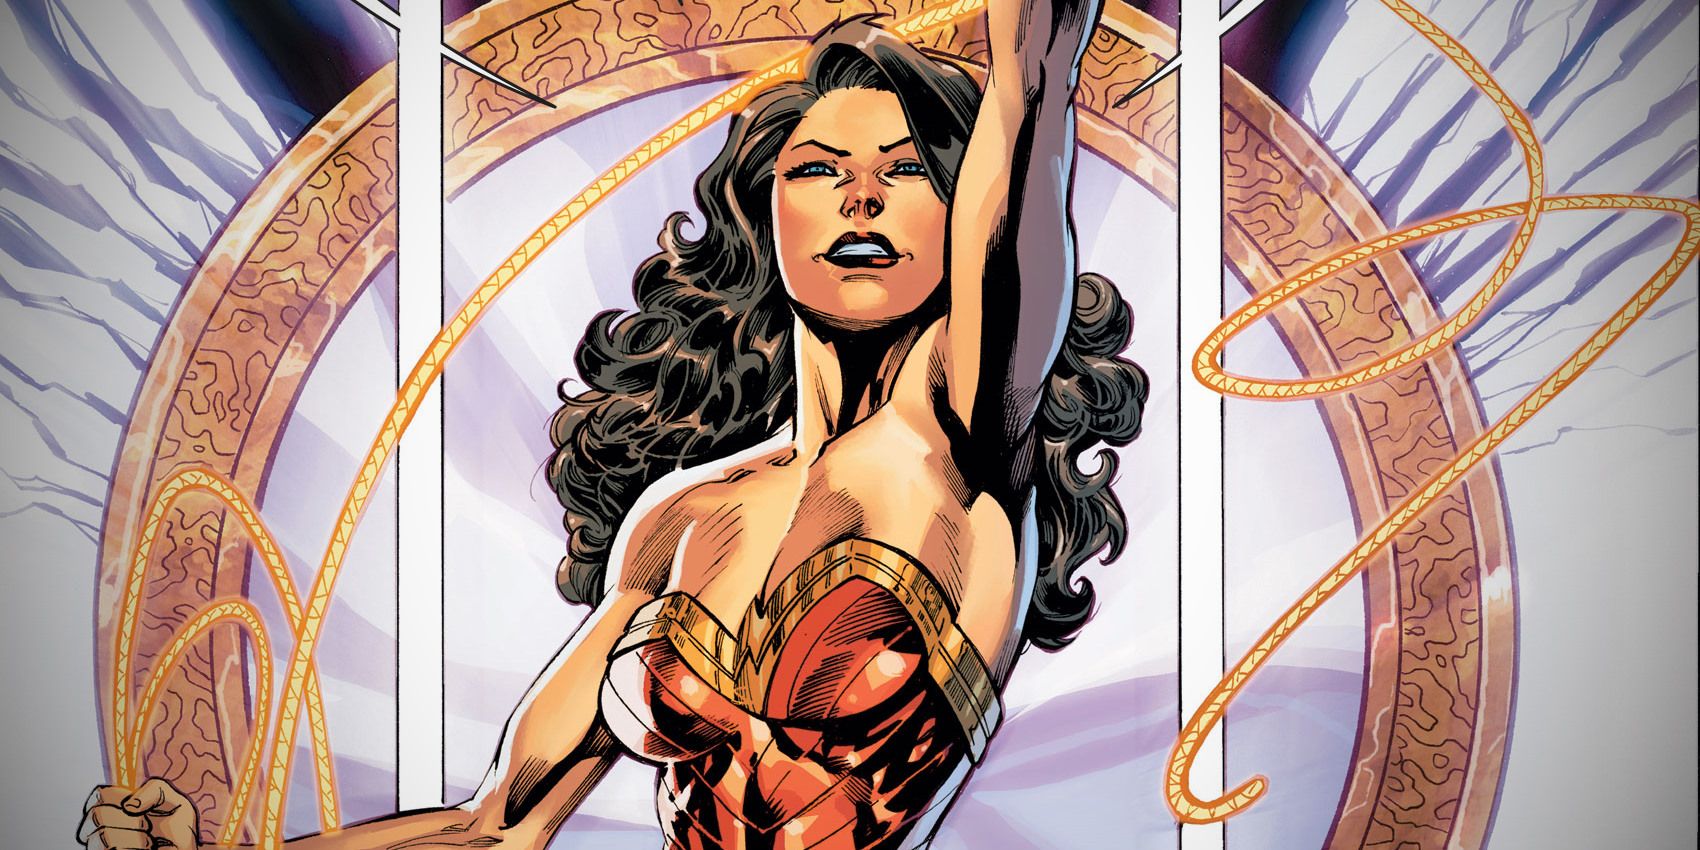 Read our exclusive preview of Wonder Woman #750 with writer Steve Orlando n...